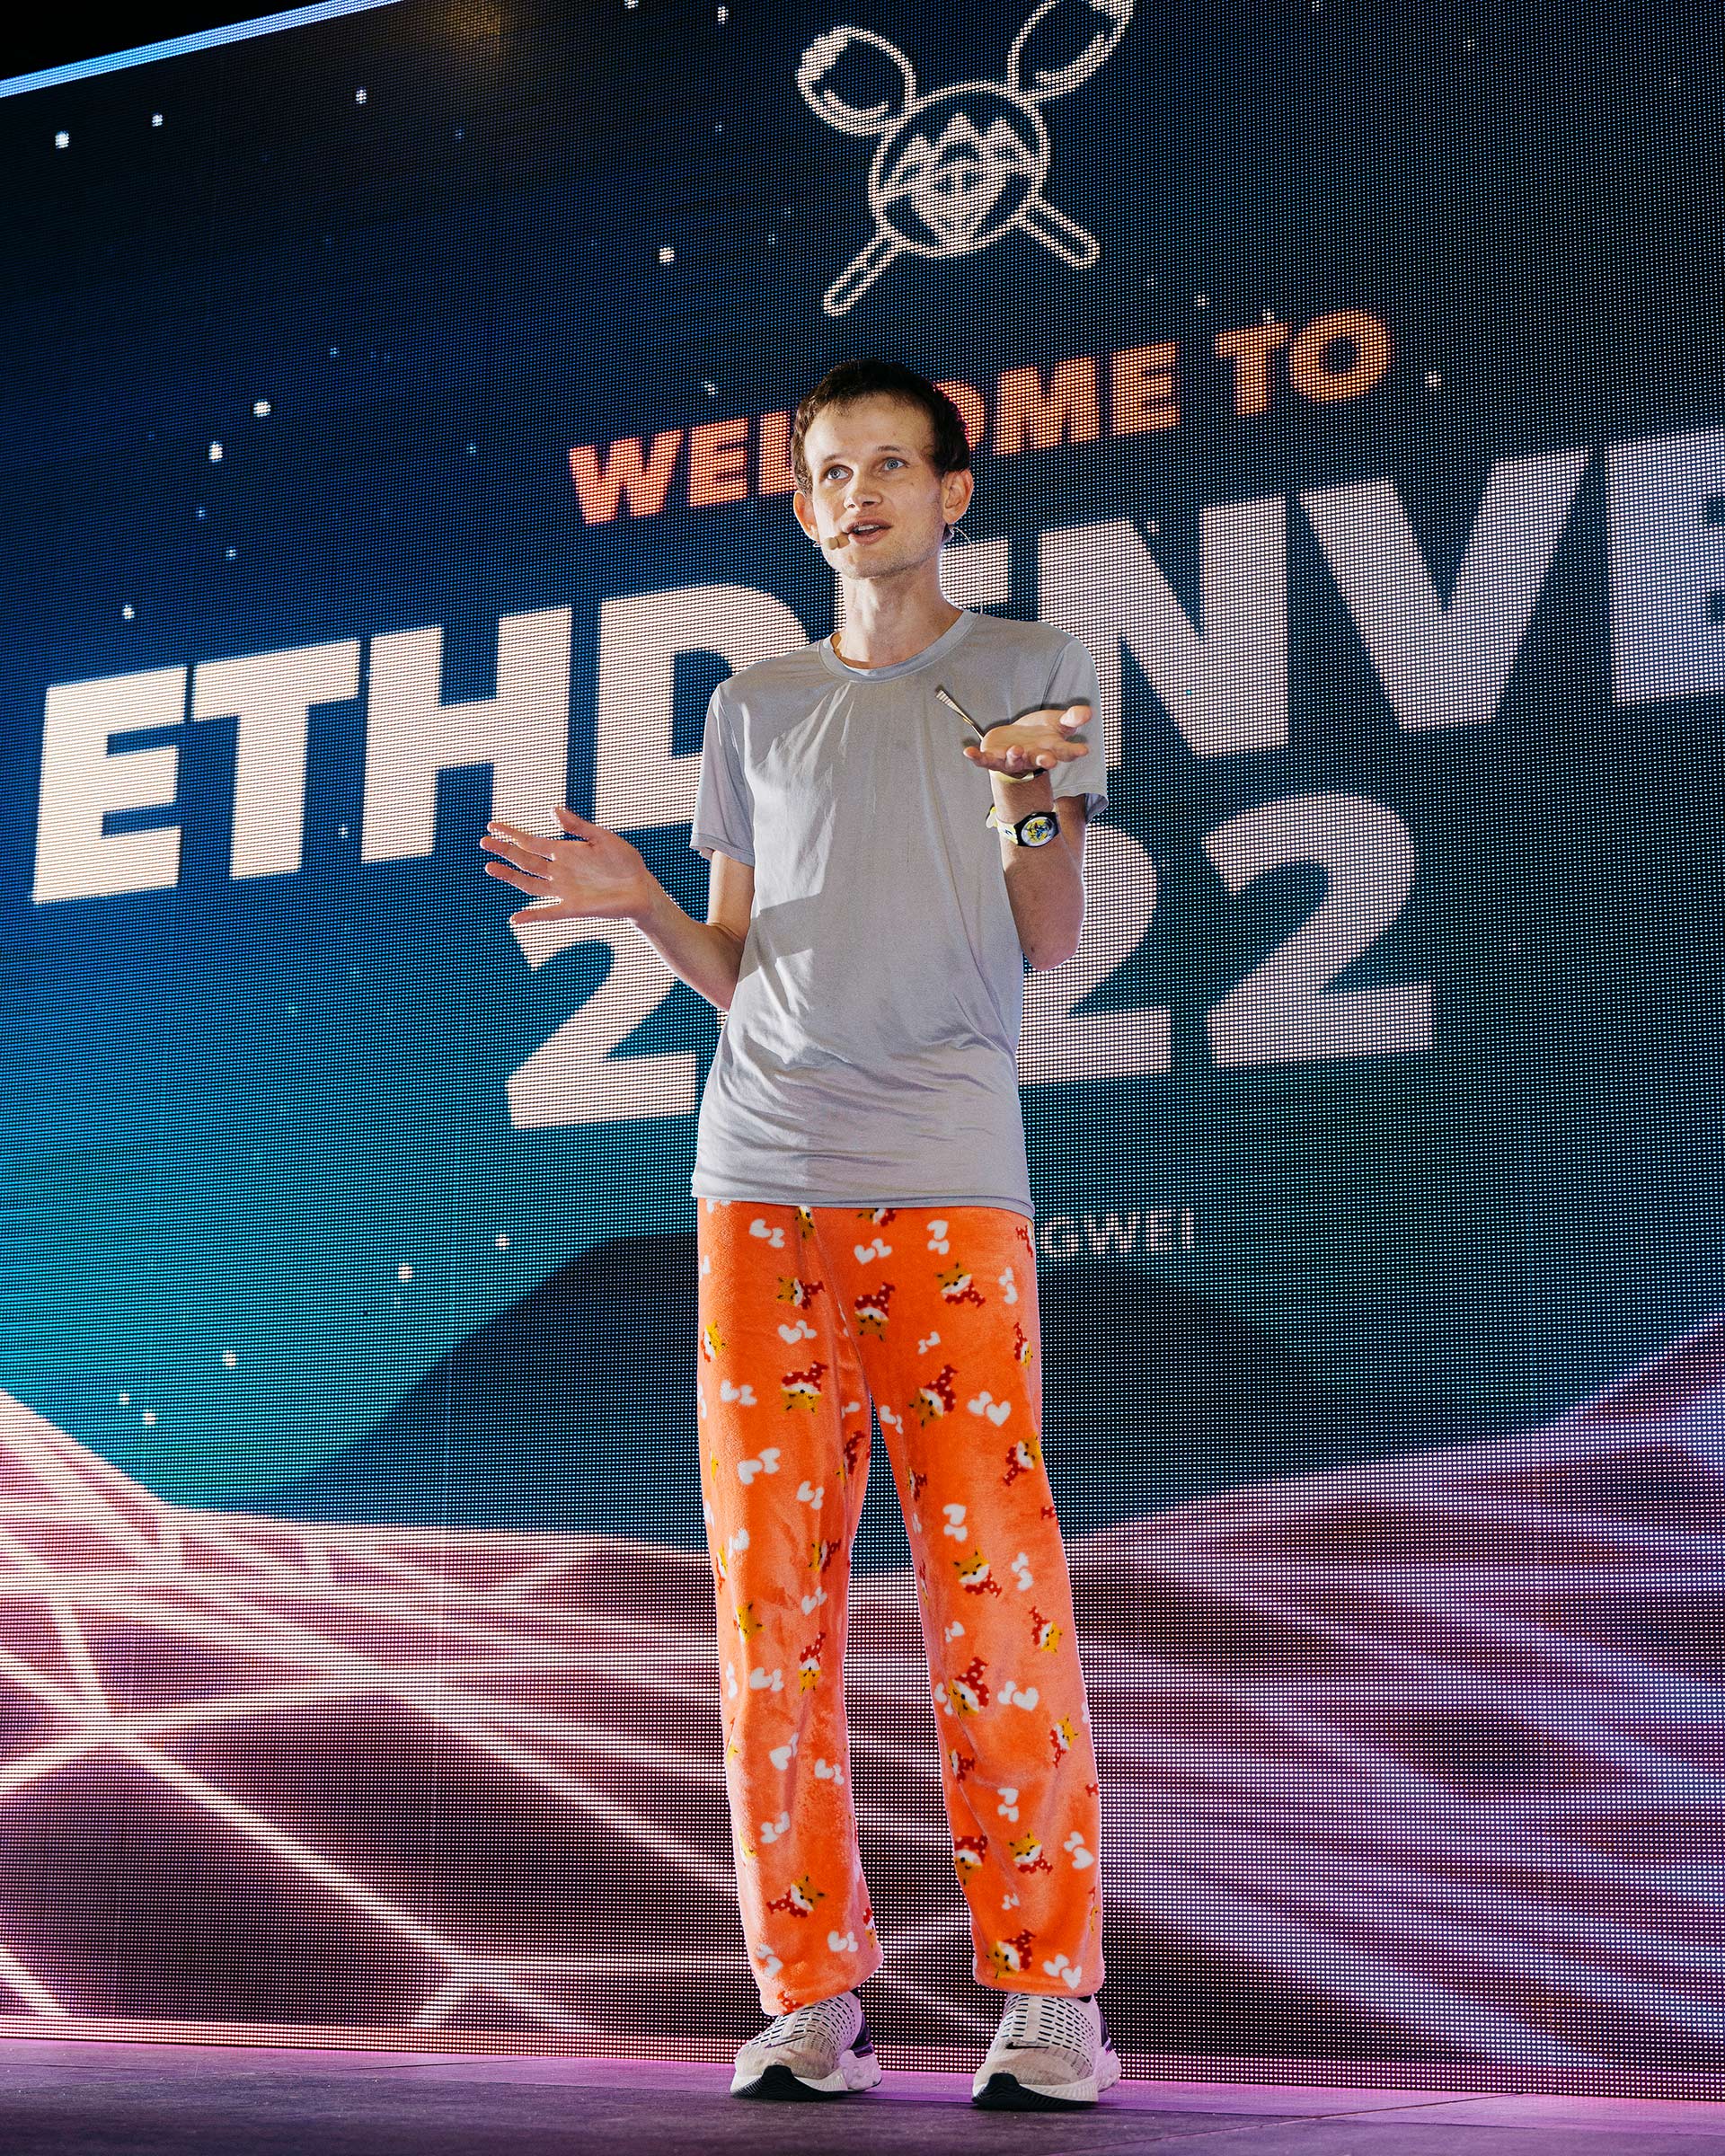 vitalik buterin ethereum ethdenver keynote - The Man Behind Ethereum Is Worried About Crypto's Future